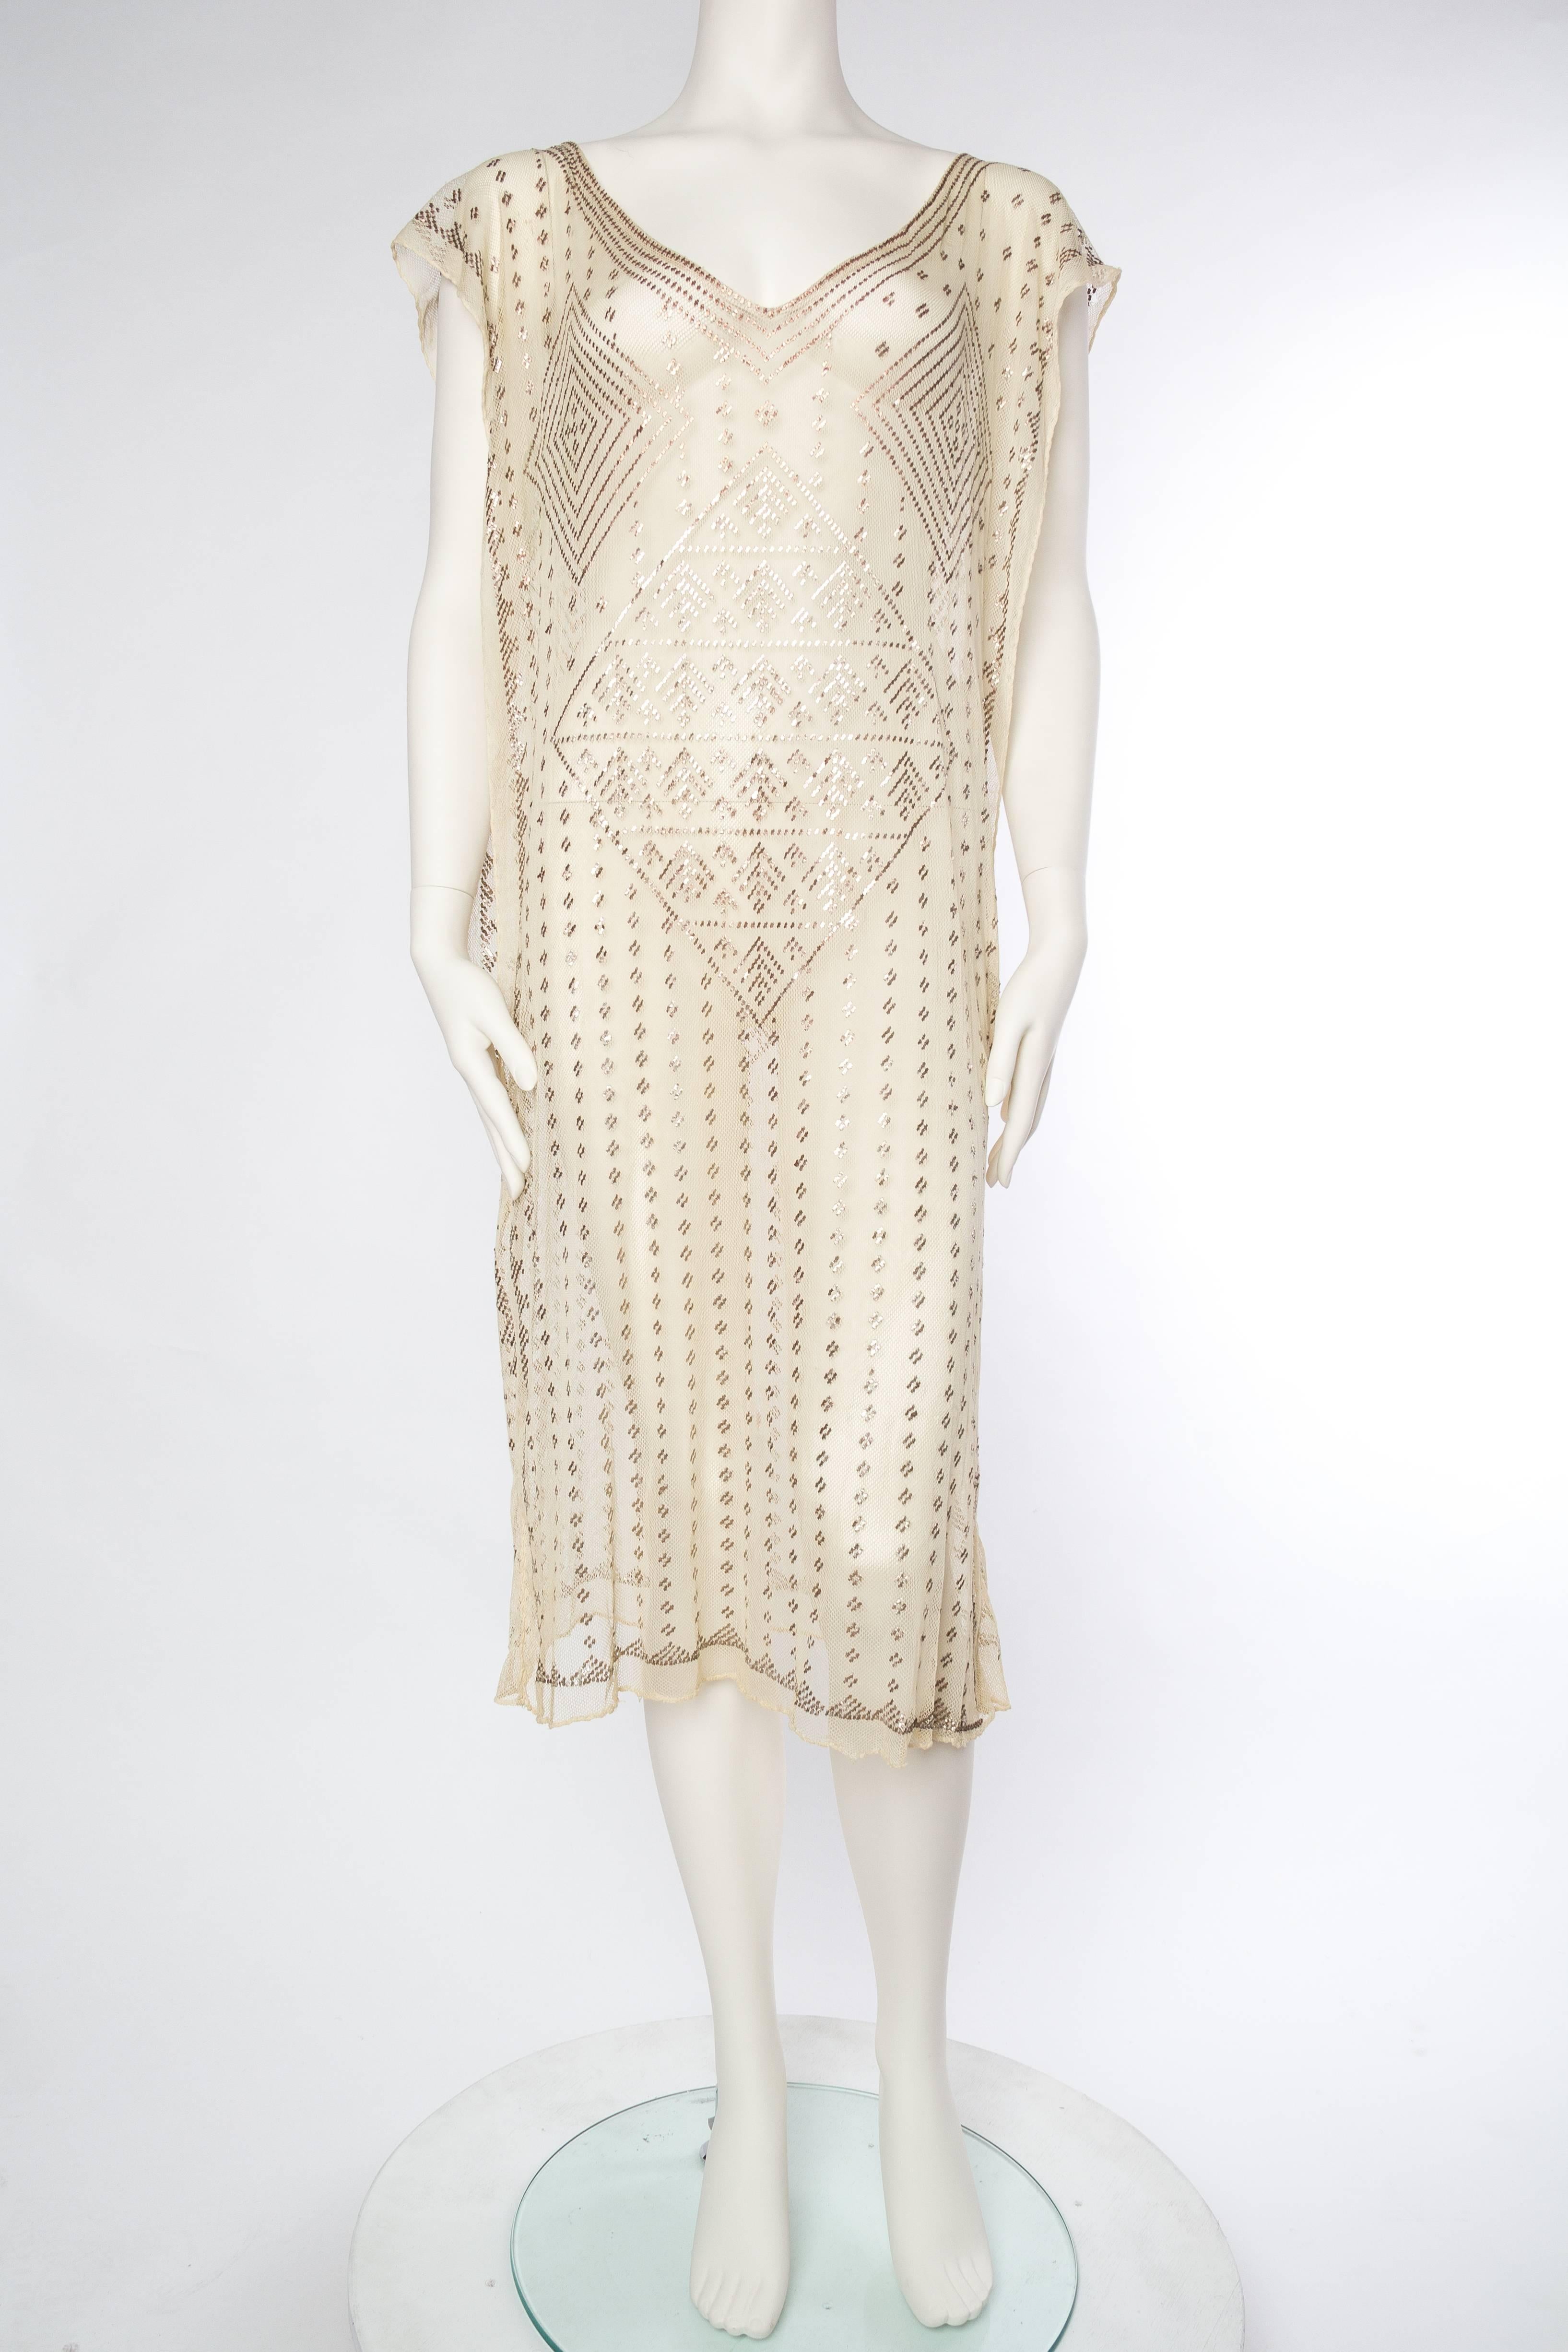 1920s Assuit Net and Silver Dress